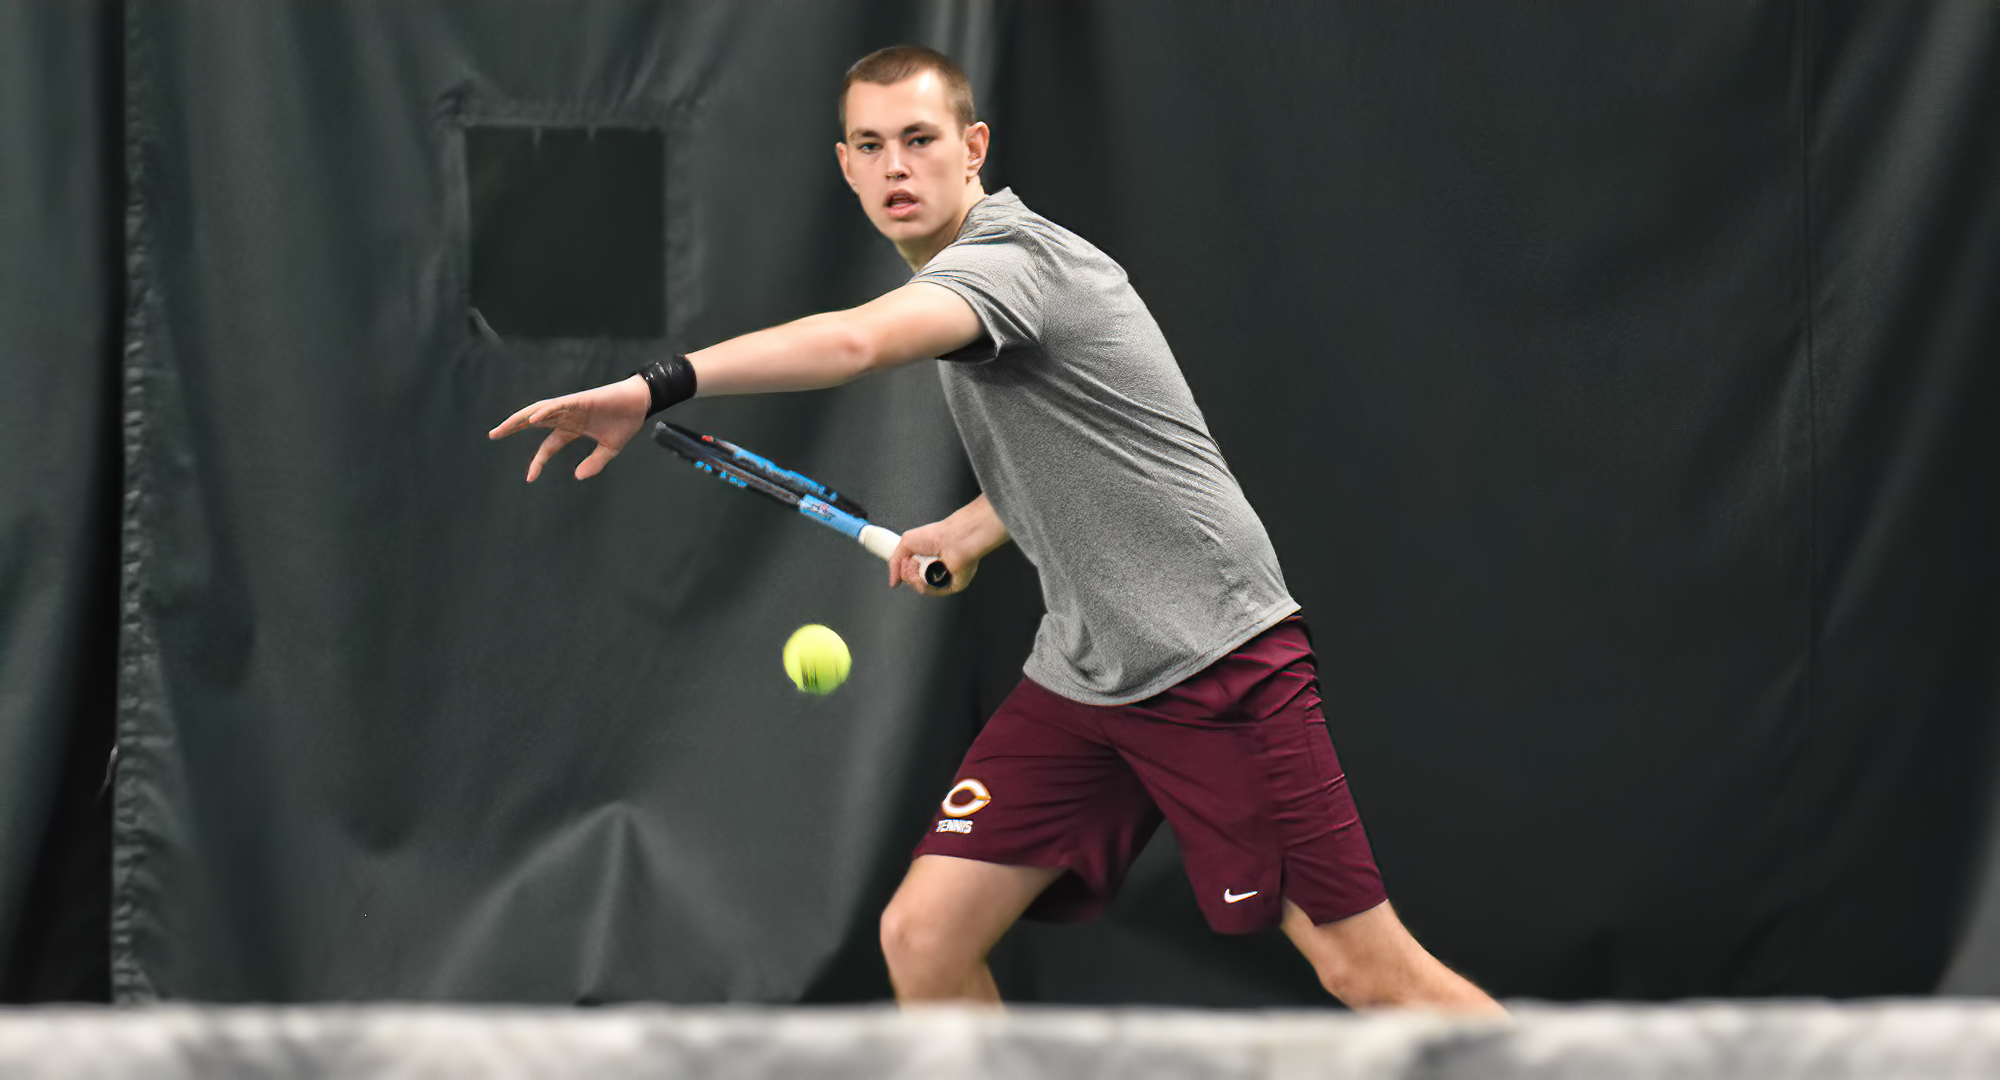 Freshmen Atticus Baker gets ready to return a serve during his No.4 singles match. Baker won 6-1, 6-0 to post his first college singles win.